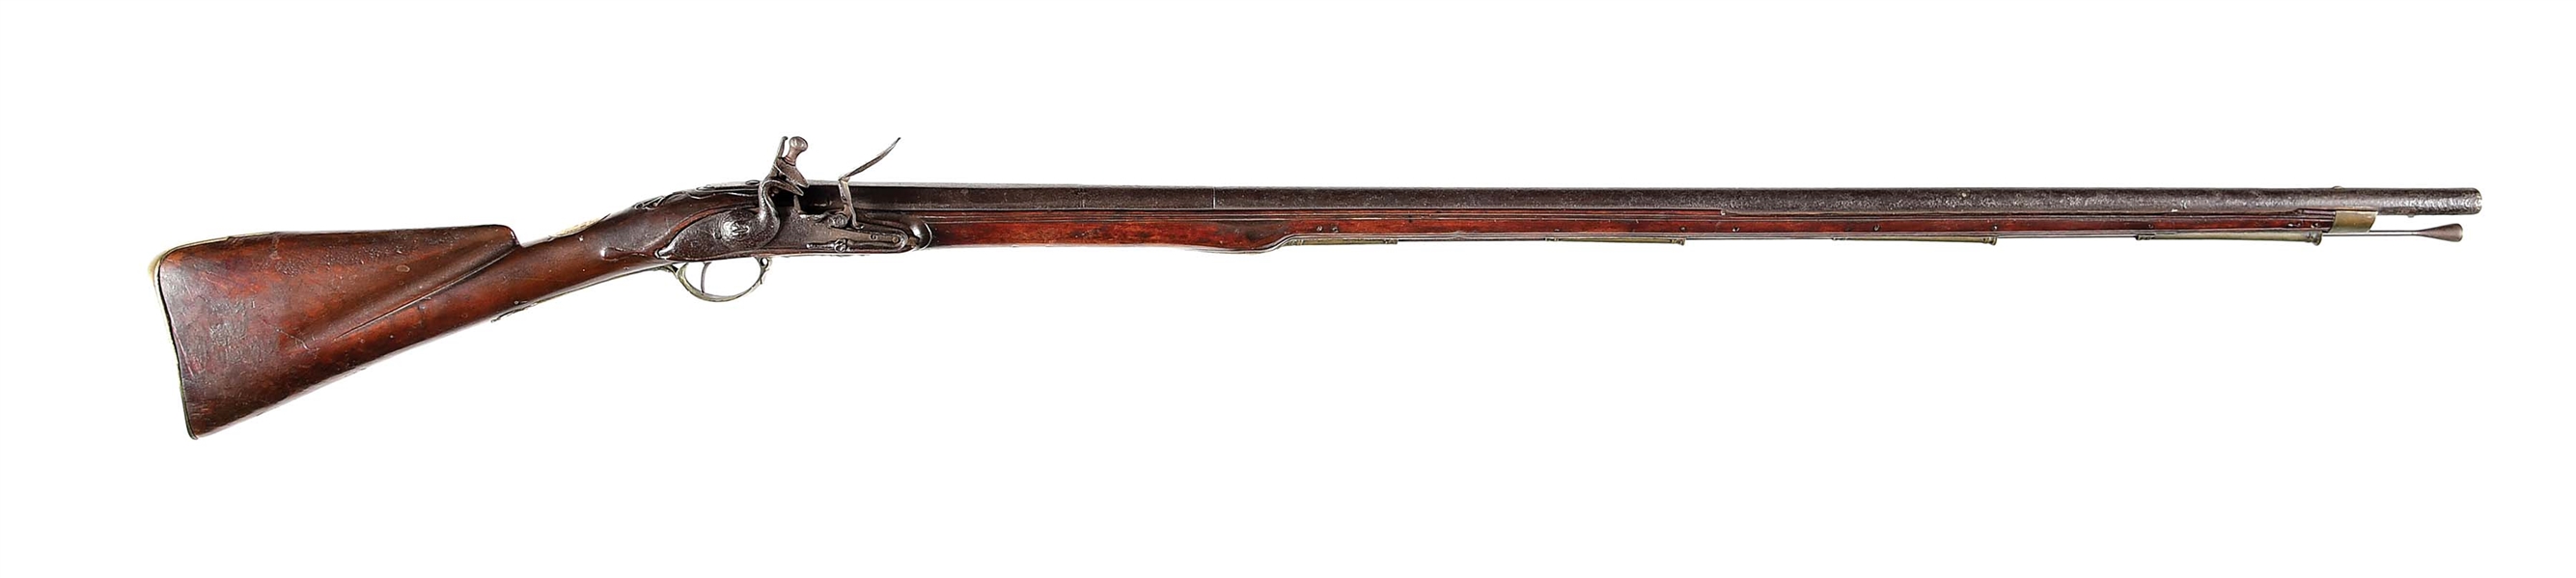 (A) IMPORTANT IDENTIFIED REVOLUTIONARY WAR NEW ENGLAND FUSIL INSCRIBED "DB FOR B. BACON 1776", RESPONDED TO LEXINGTON ALARM.